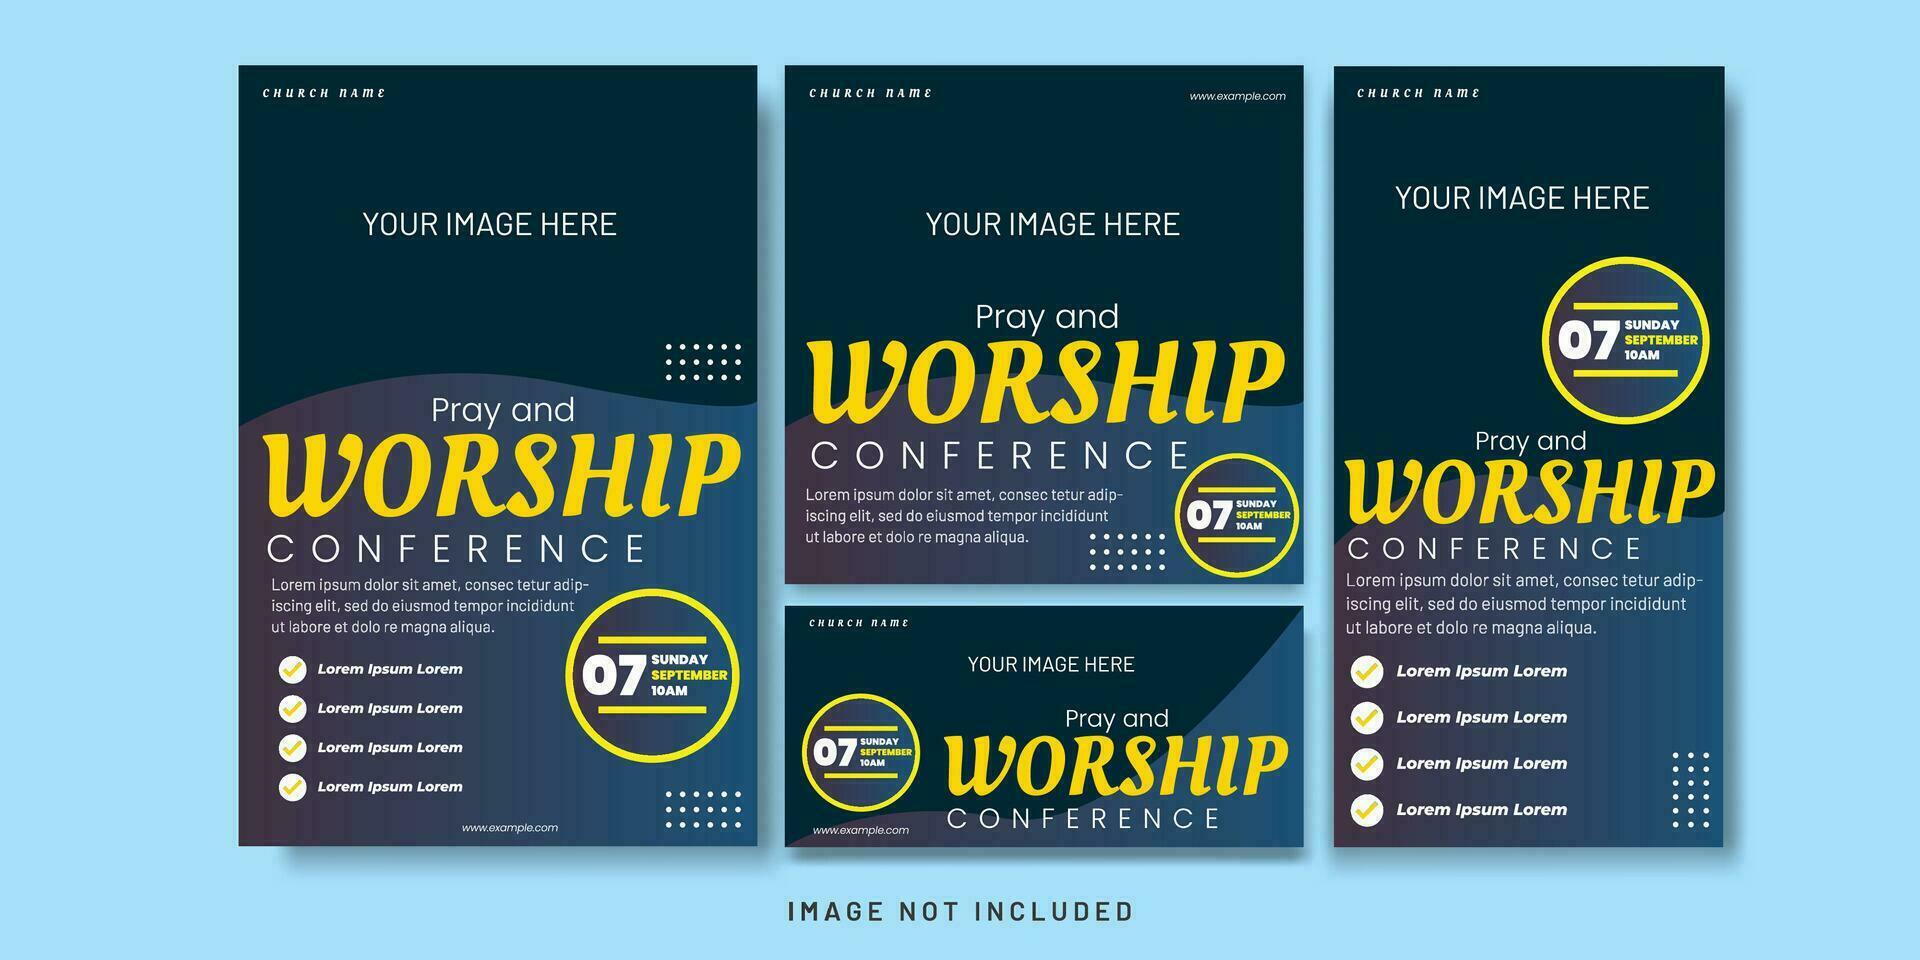 Pray and Worship Conference Flyer and Social media Bundle Set vector